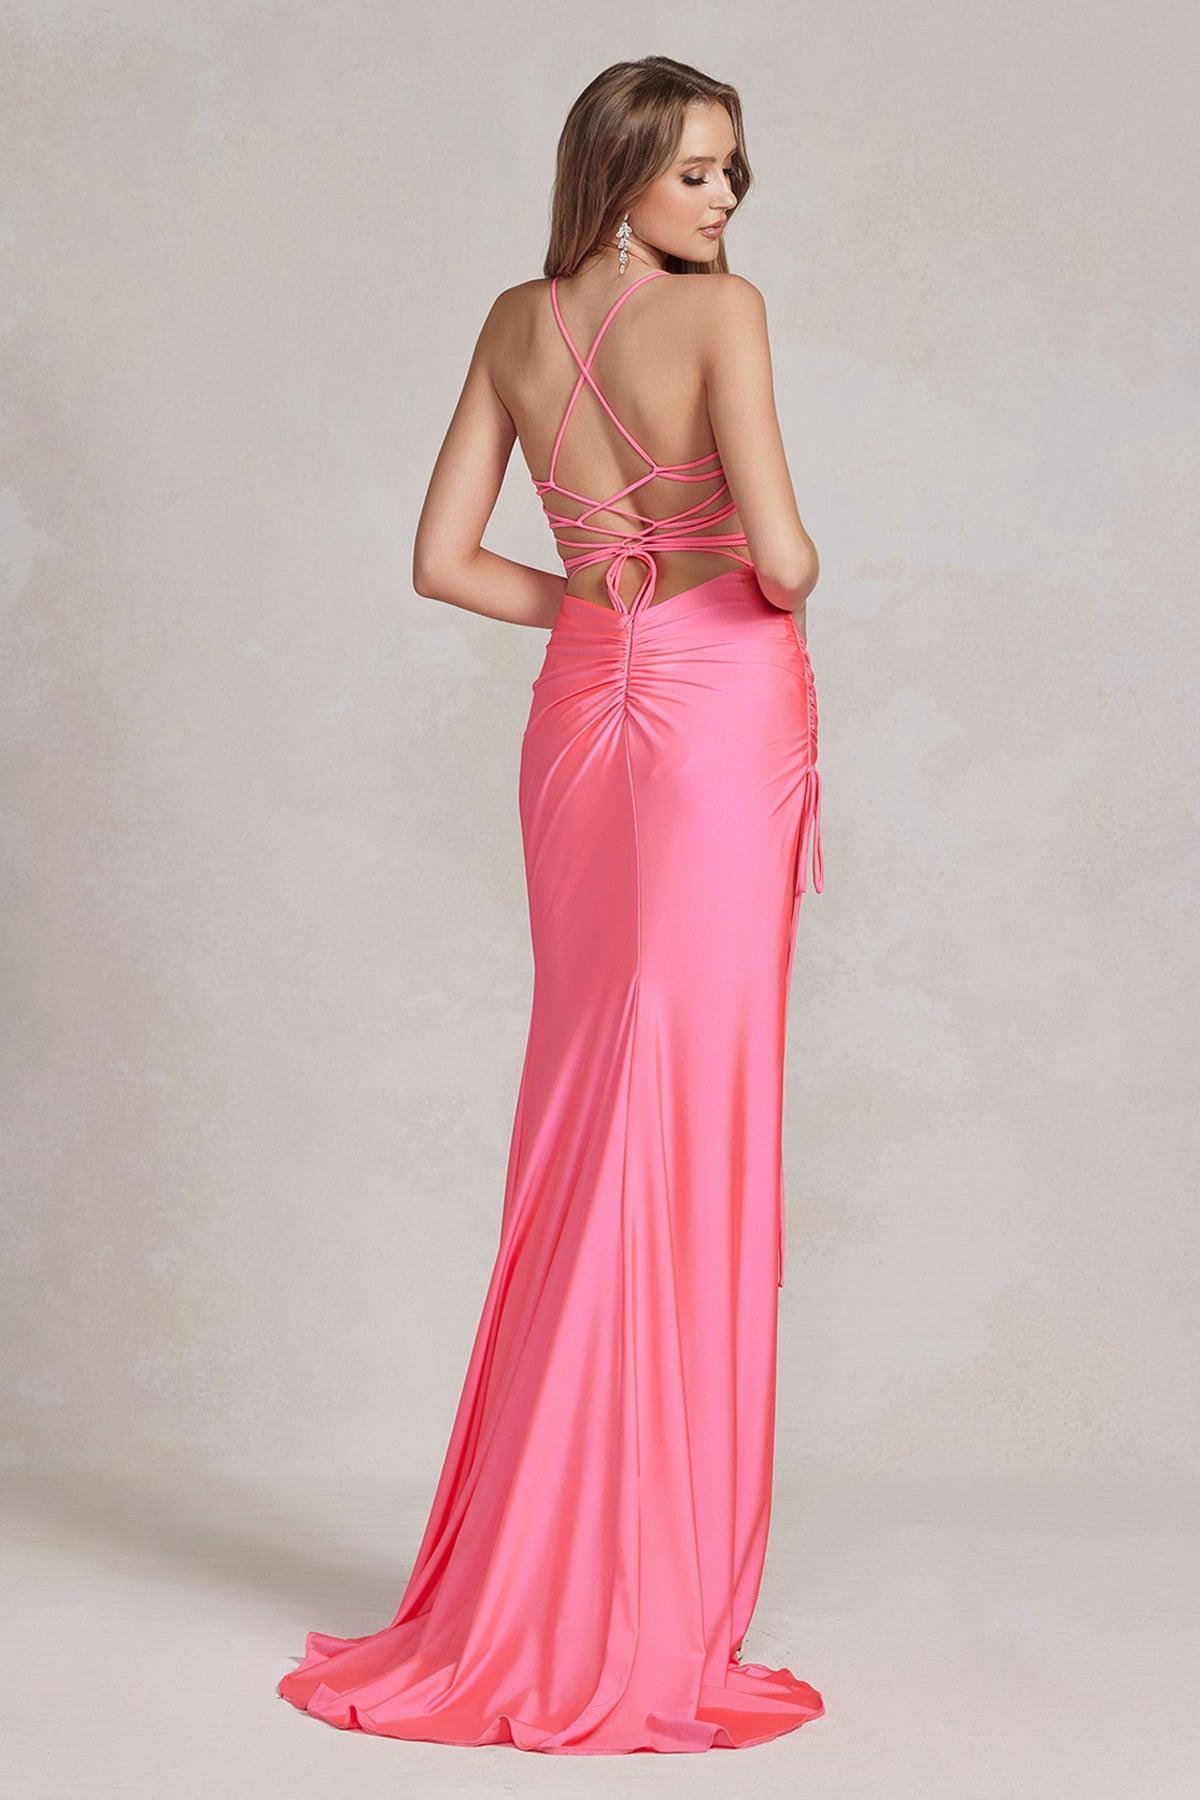 Nox Anabel T1140 Long Spaghetti Strap Sexy Prom Dress | The Dress Outlet